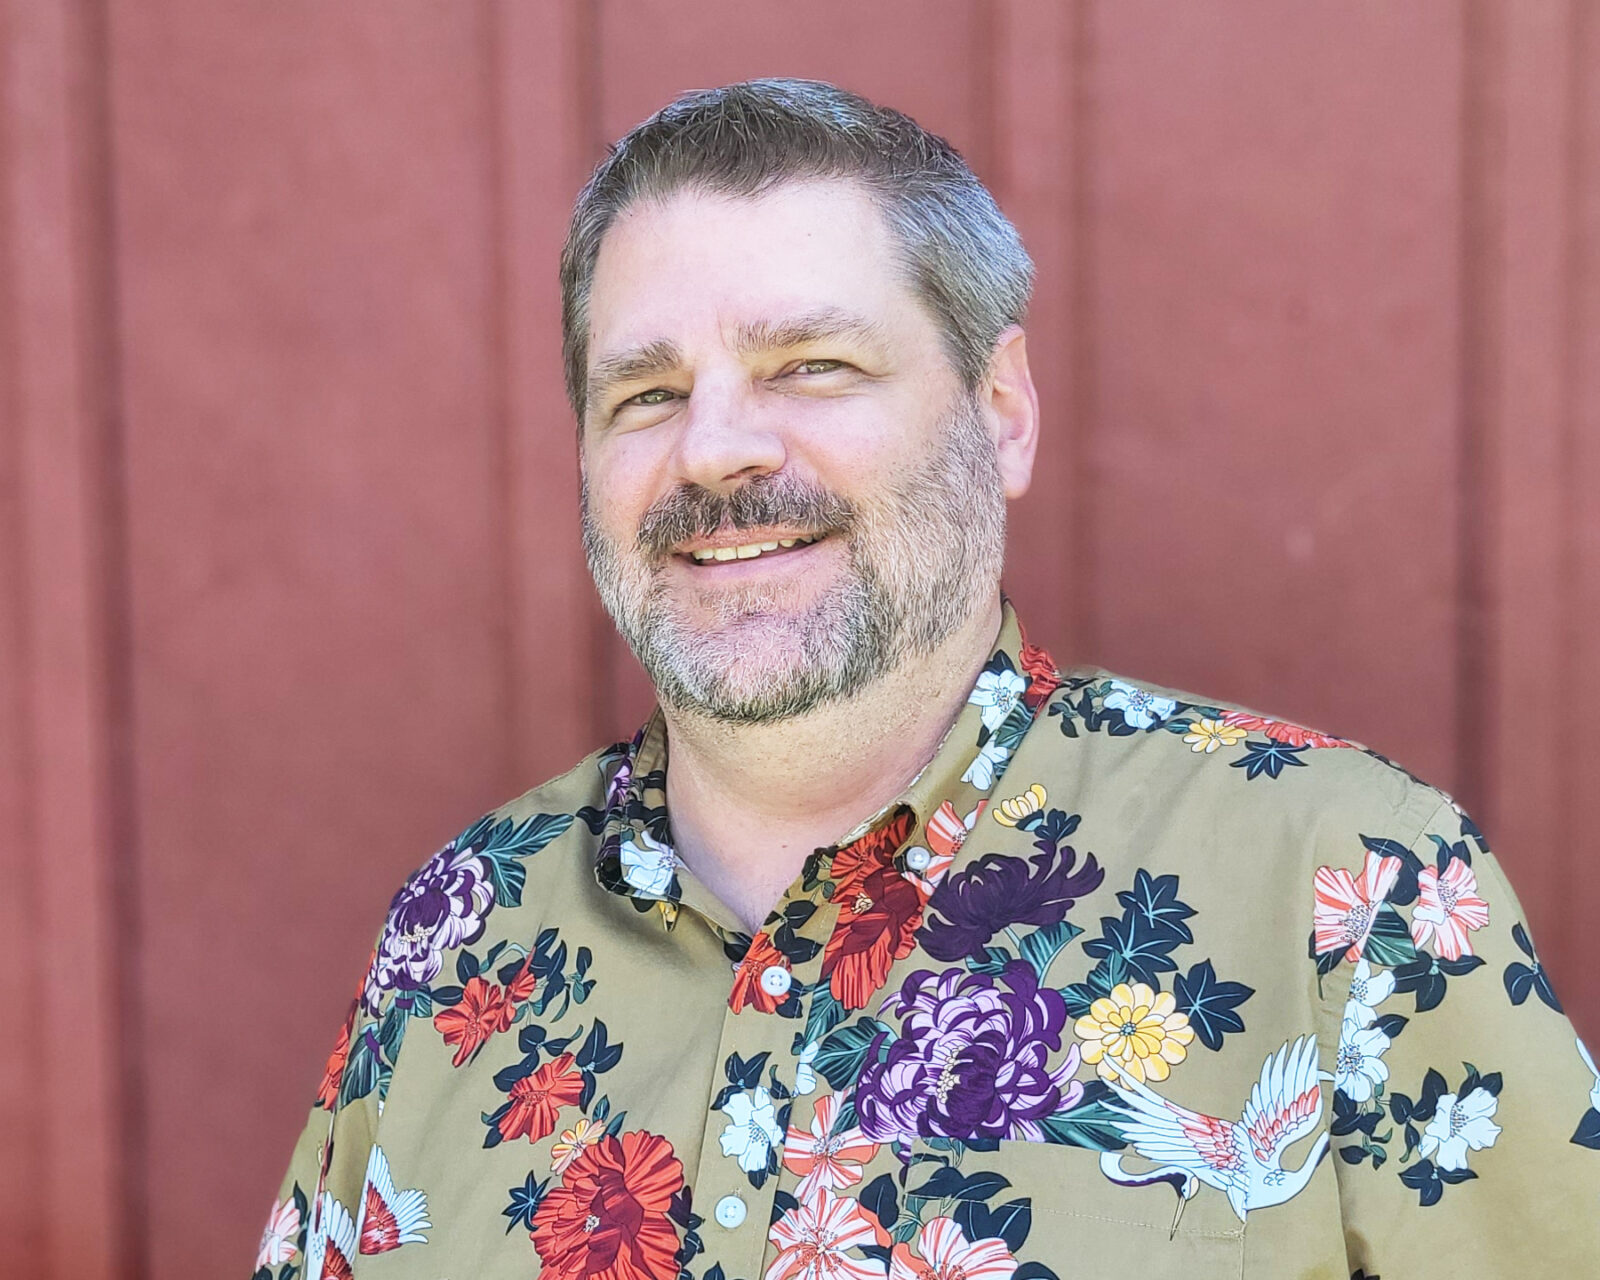 Man wearing a floral print button-down shirt smiles into camera.